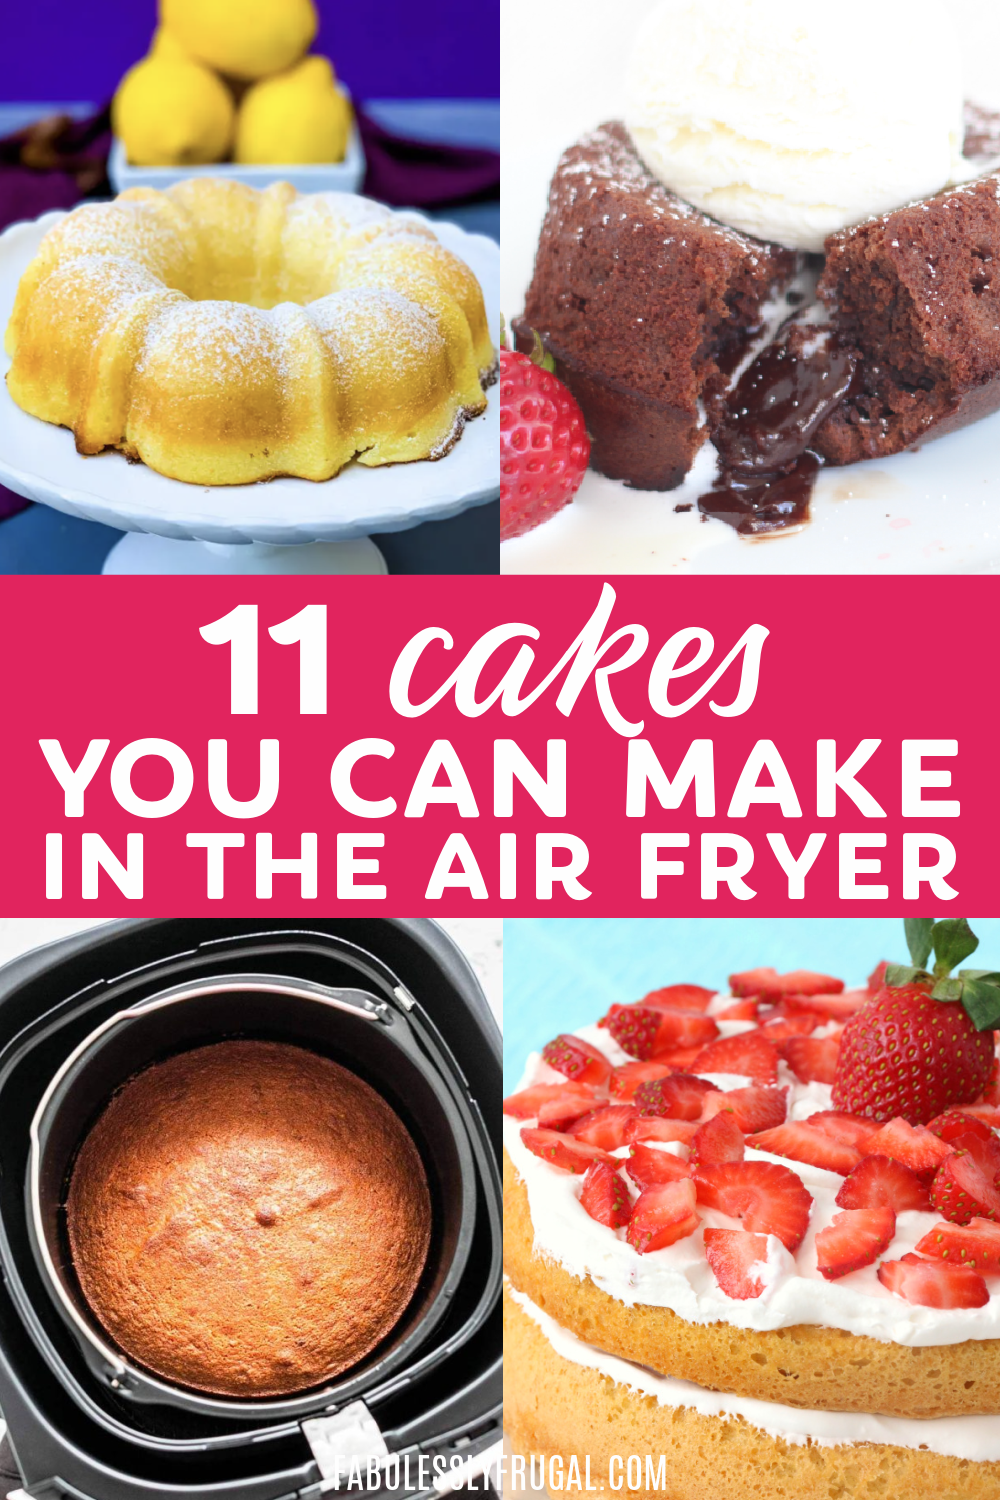 You will love these air fryer cakes because they are so delicious and easy to make